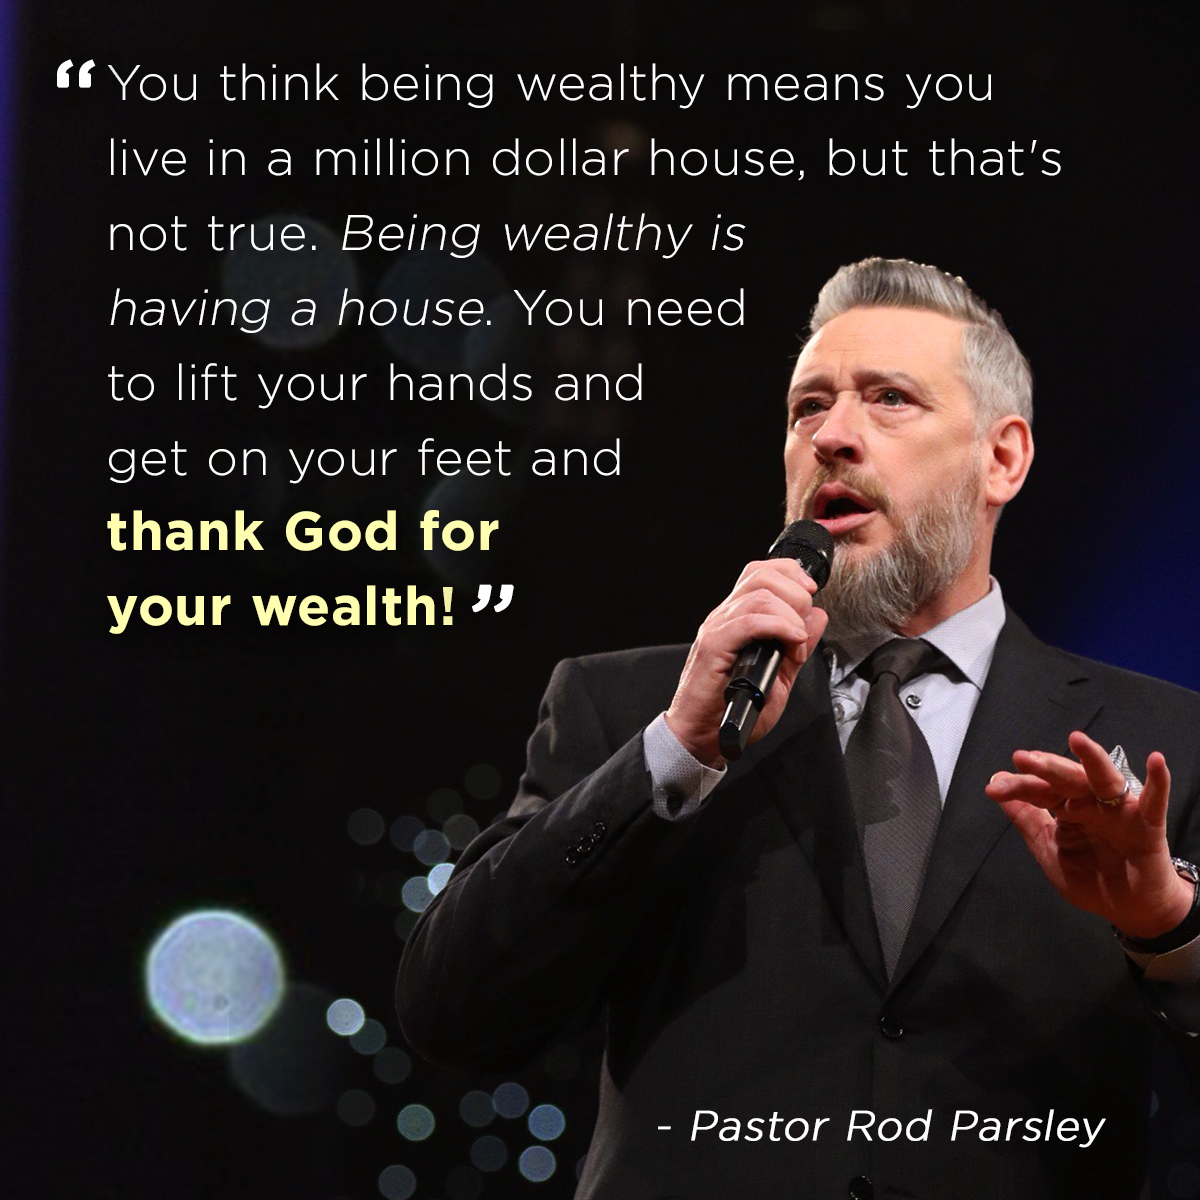 “You think being wealthy means you live in a million dollar house, but that’ not true. Being wealthy is having a house. You need to lift your hands and get on your feet and thank God for your wealth” – Pastor Rod Parsley